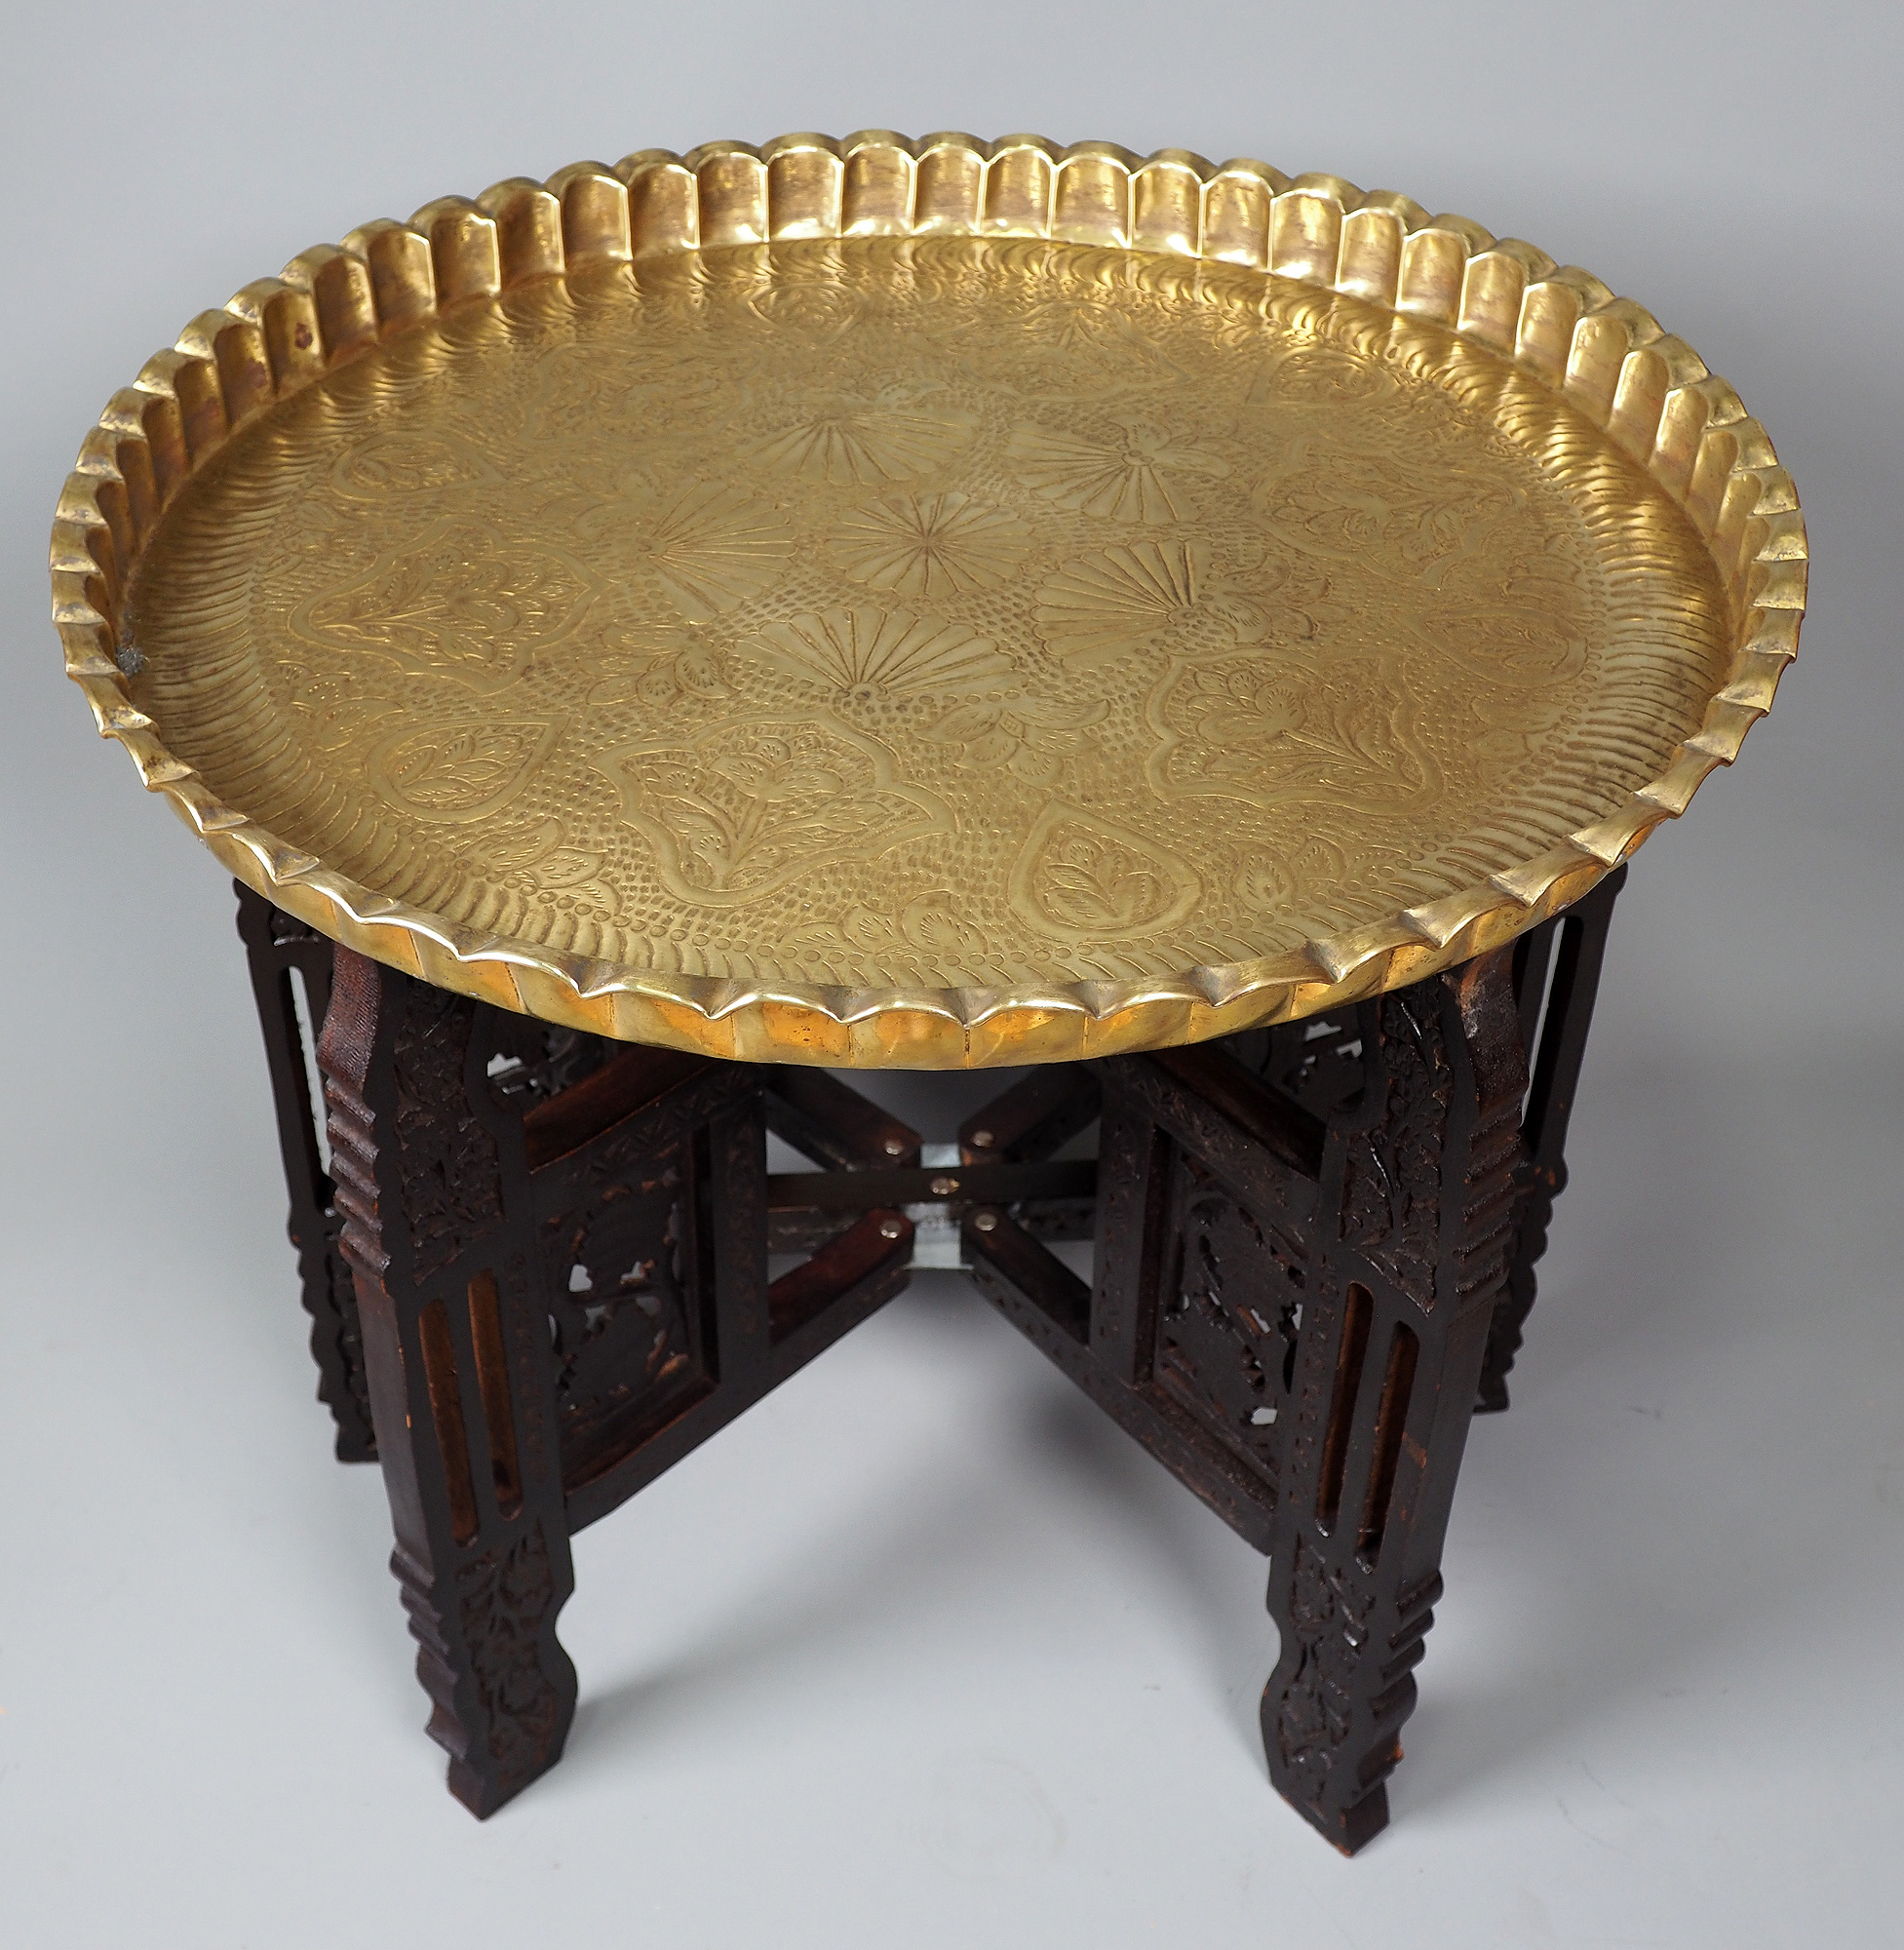 55 cm Antique ottoman orient Islamic  Hammer Engraved Brass table Tea table side table Tray from Afghanistan  No-21/F